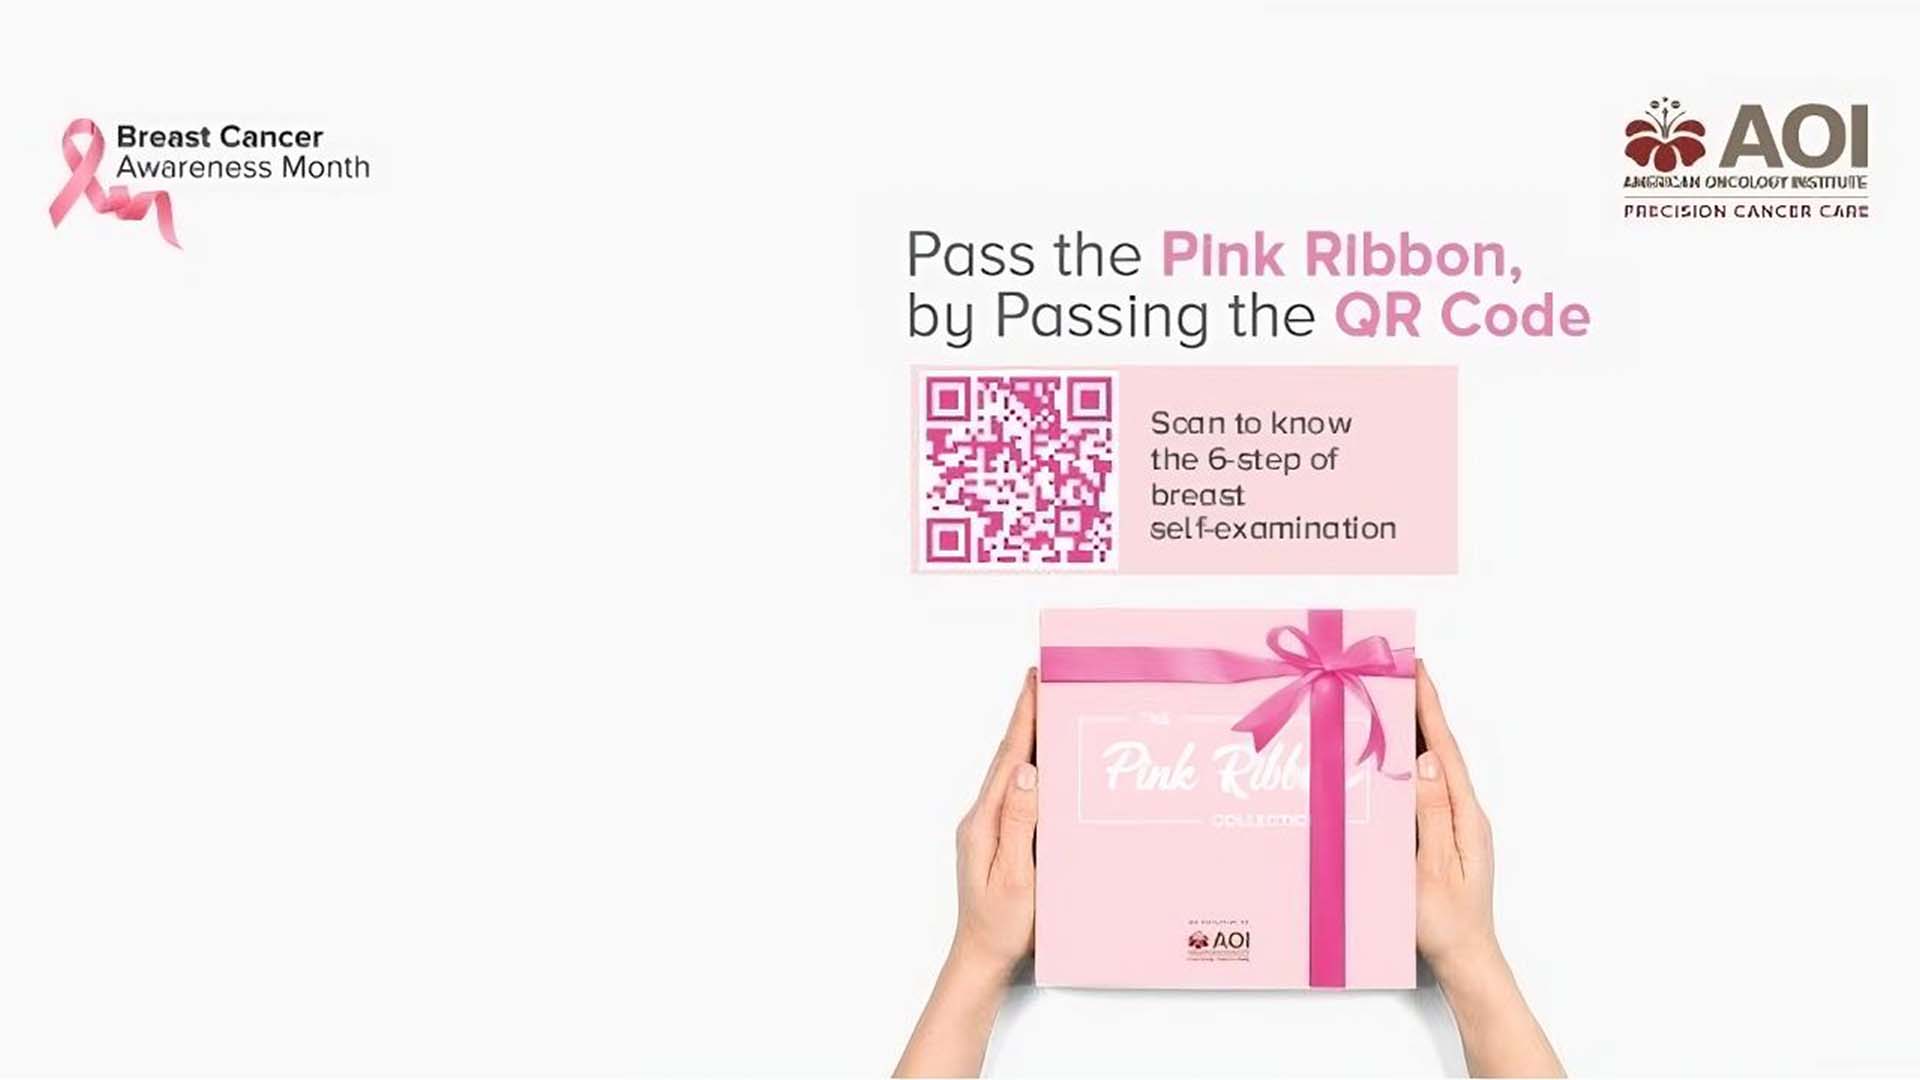 Amplifying breast cancer awareness in India with #PassTheQRCode campaign